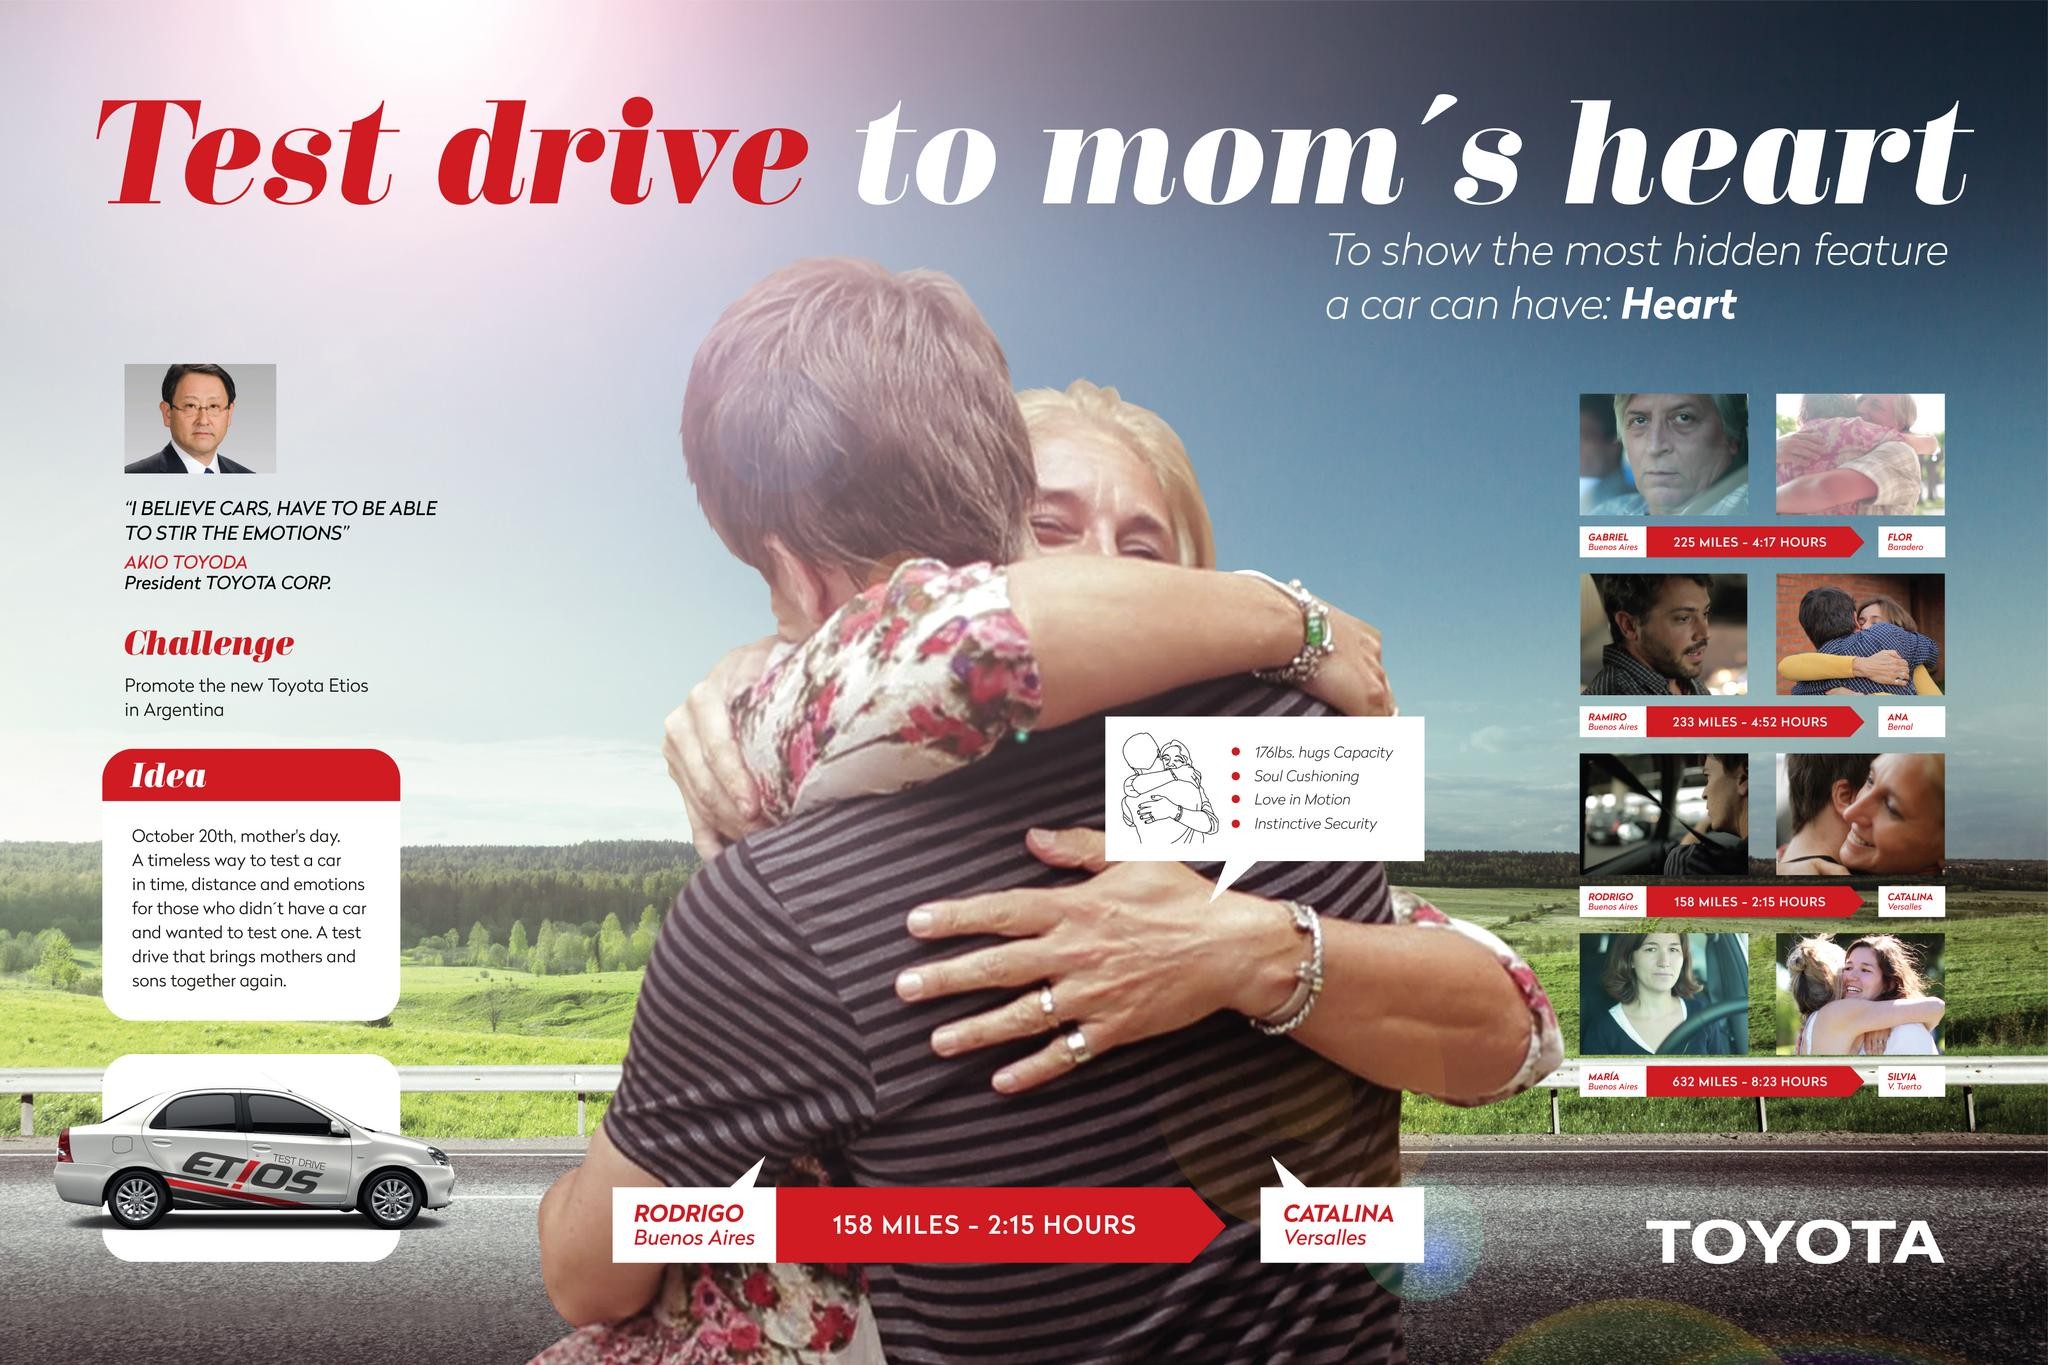 TEST DRIVE TO MOM'S HEART